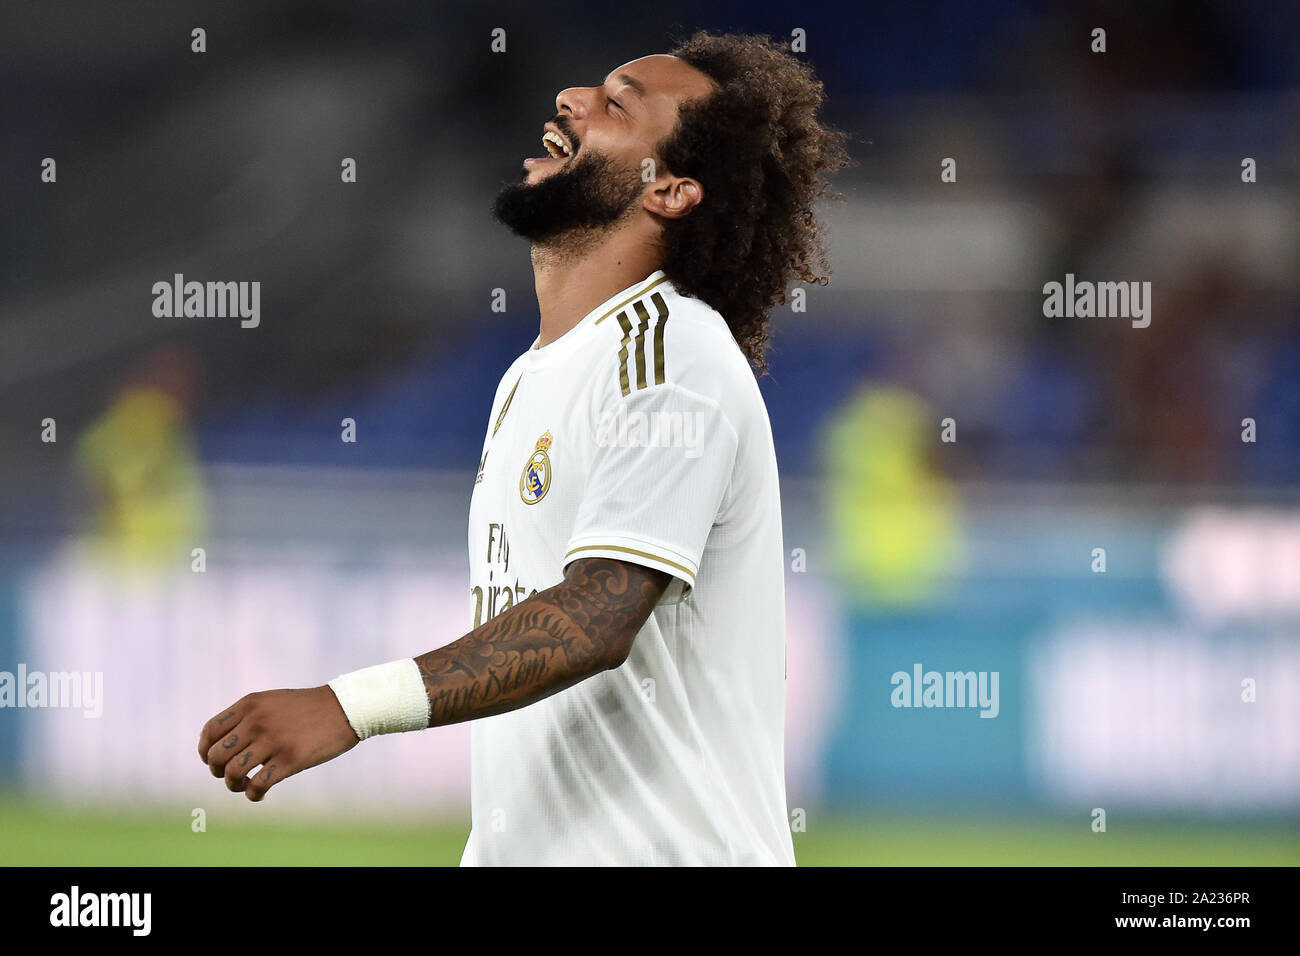 Marcelo of Real Madrid reacts after failed the decisive penalty   Roma 11/08/2019 Stadio Stadio Olimpico Football friendly match pre season 2019/2020 Stock Photo